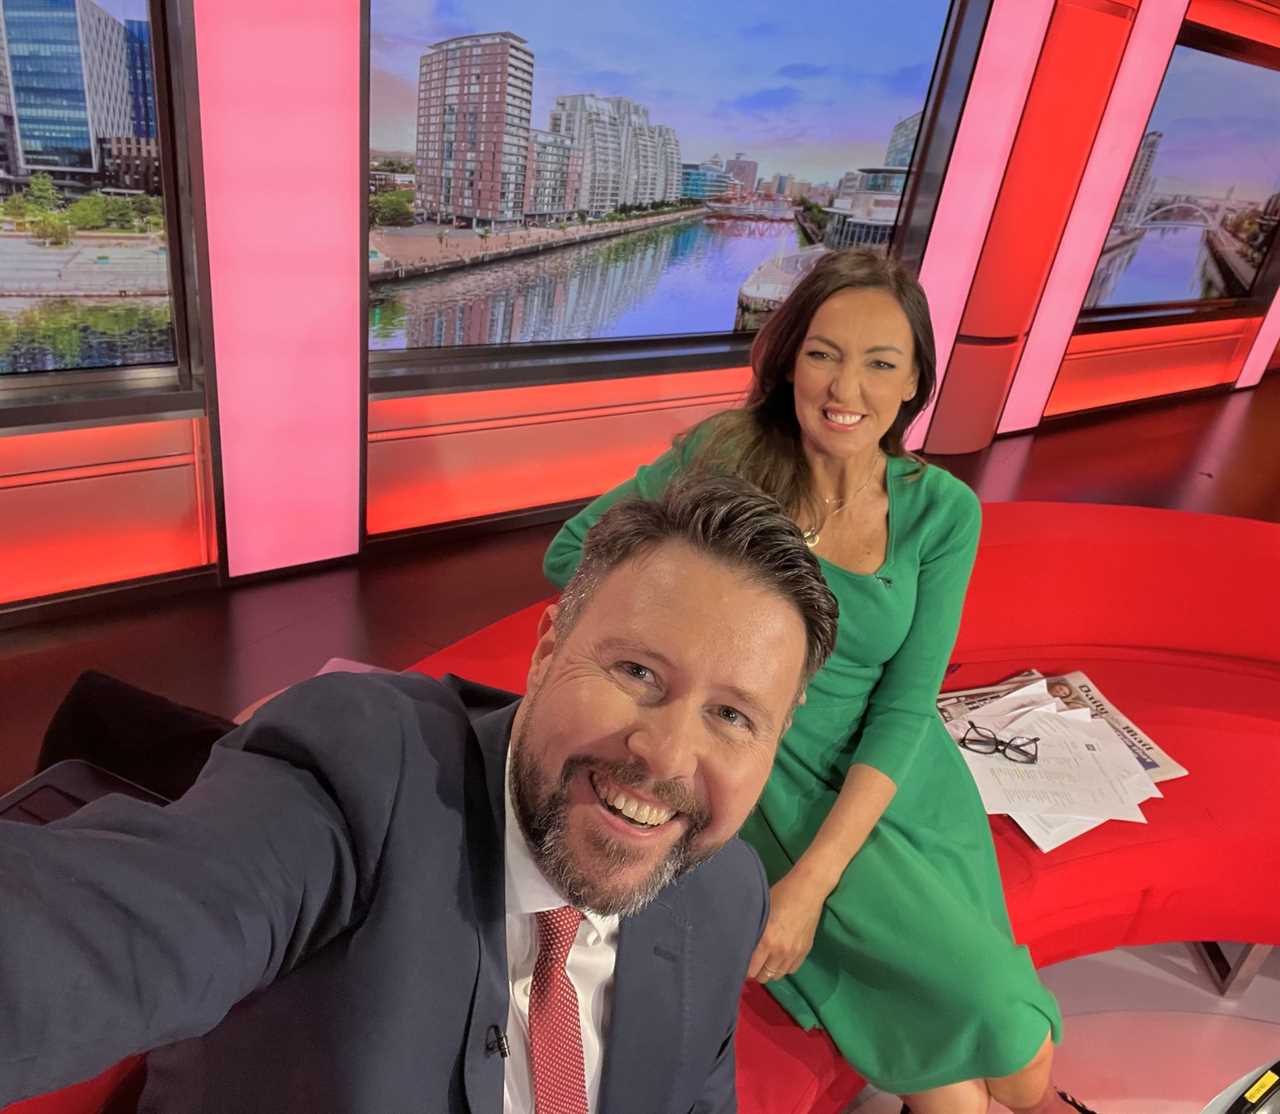 BBC Breakfast in ANOTHER host shake-up as Dan Walker’s replacement Jon Kay forced to pull out of first show